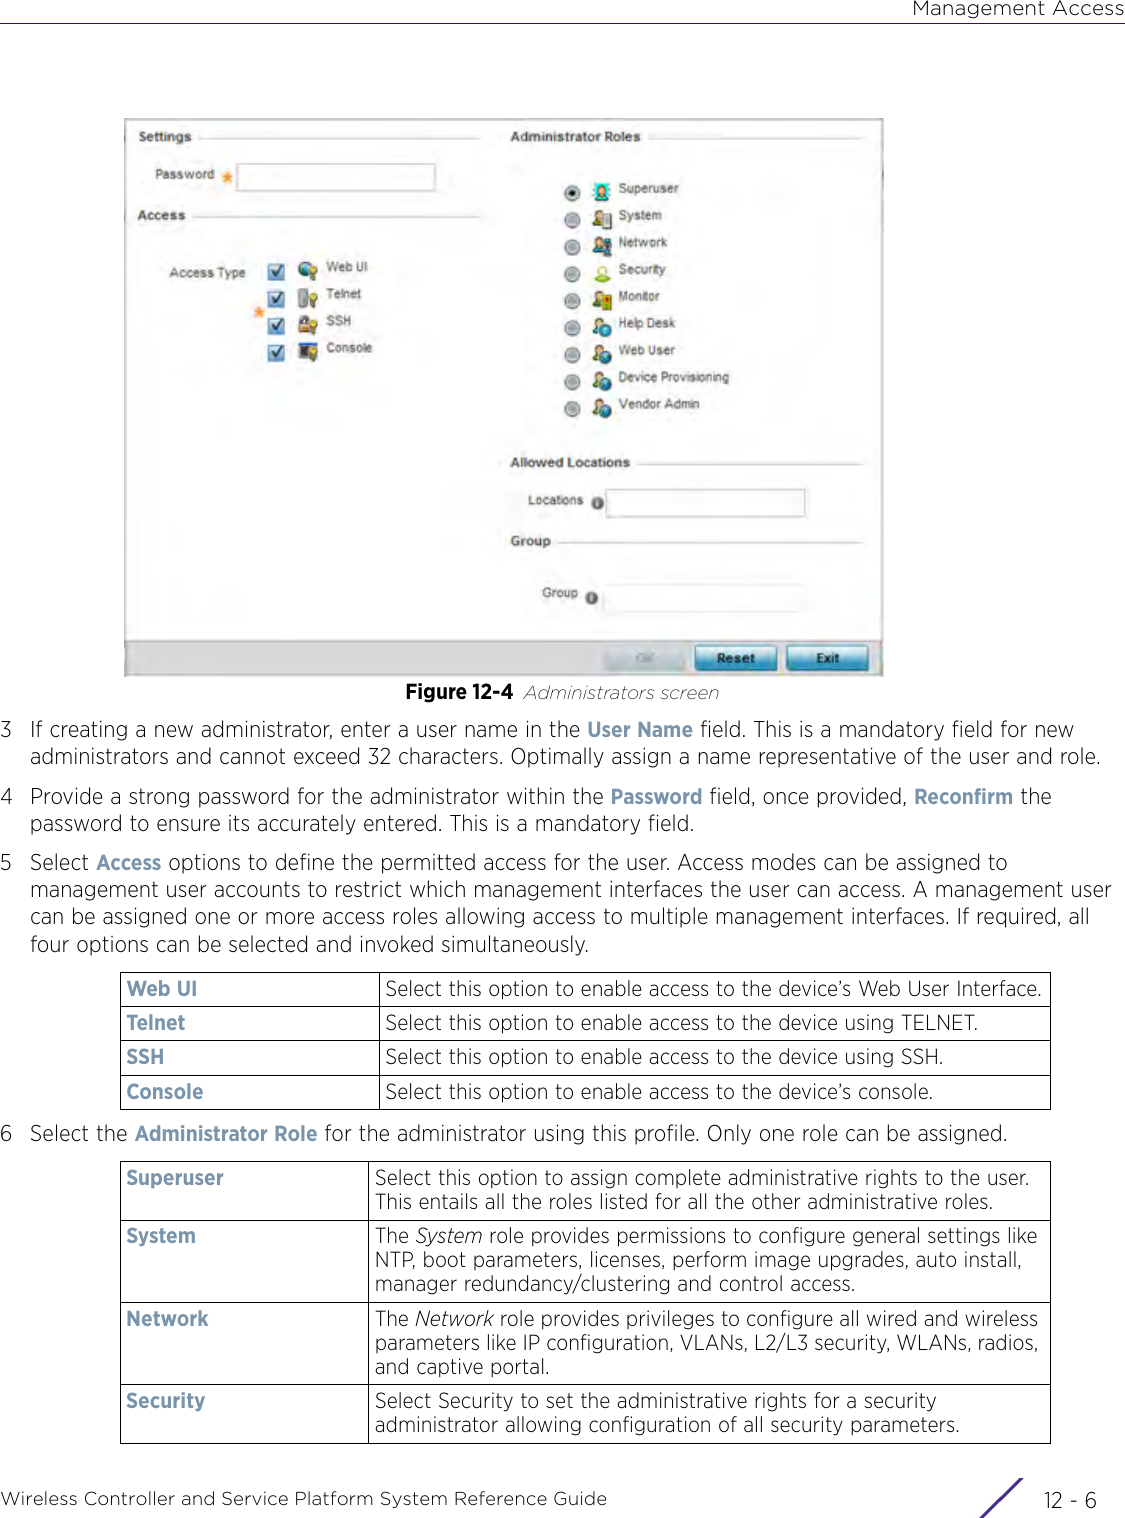 Management AccessWireless Controller and Service Platform System Reference Guide  12 - 6Figure 12-4 Administrators screen3 If creating a new administrator, enter a user name in the User Name field. This is a mandatory field for new administrators and cannot exceed 32 characters. Optimally assign a name representative of the user and role. 4 Provide a strong password for the administrator within the Password field, once provided, Reconfirm the password to ensure its accurately entered. This is a mandatory field.5Select Access options to define the permitted access for the user. Access modes can be assigned to management user accounts to restrict which management interfaces the user can access. A management user can be assigned one or more access roles allowing access to multiple management interfaces. If required, all four options can be selected and invoked simultaneously.6 Select the Administrator Role for the administrator using this profile. Only one role can be assigned. Web UI Select this option to enable access to the device’s Web User Interface.Telnet Select this option to enable access to the device using TELNET.SSH Select this option to enable access to the device using SSH.Console Select this option to enable access to the device’s console.Superuser Select this option to assign complete administrative rights to the user. This entails all the roles listed for all the other administrative roles.System The System role provides permissions to configure general settings like NTP, boot parameters, licenses, perform image upgrades, auto install, manager redundancy/clustering and control access. Network The Network role provides privileges to configure all wired and wireless parameters like IP configuration, VLANs, L2/L3 security, WLANs, radios, and captive portal.Security Select Security to set the administrative rights for a security administrator allowing configuration of all security parameters.